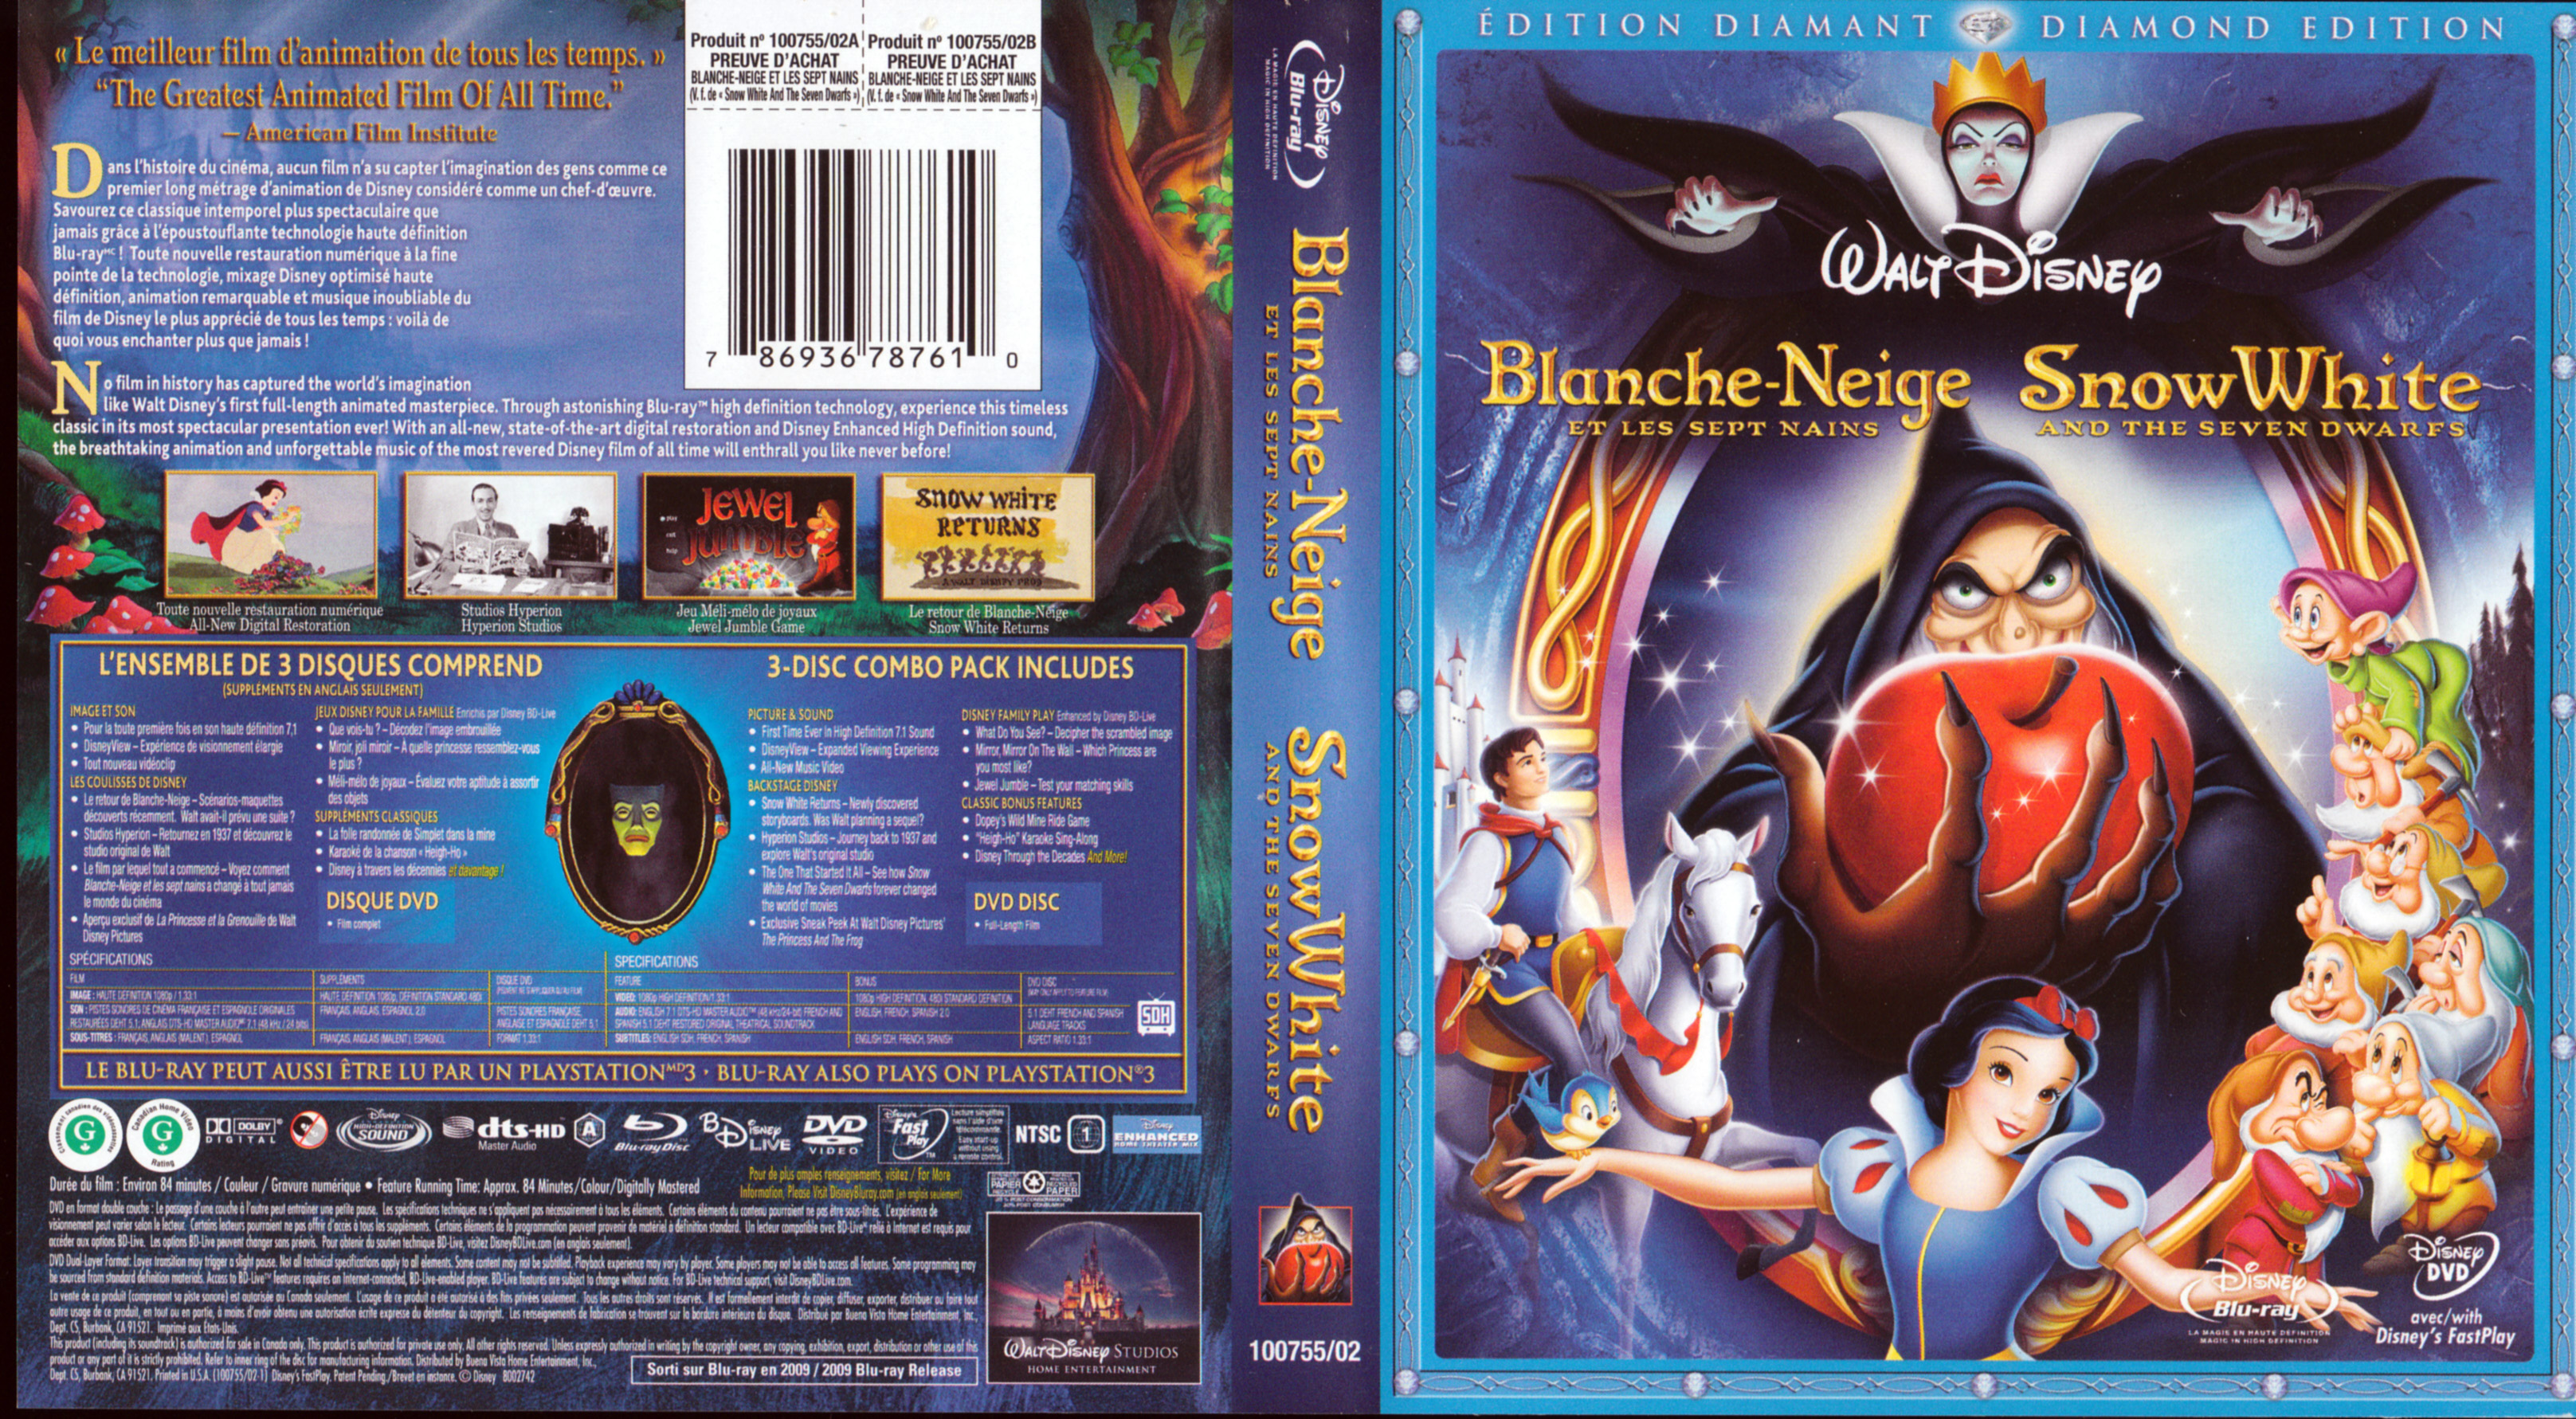 Jaquette DVD Blanche Neige et les sept nains (BLU-RAY) (Canadienne)